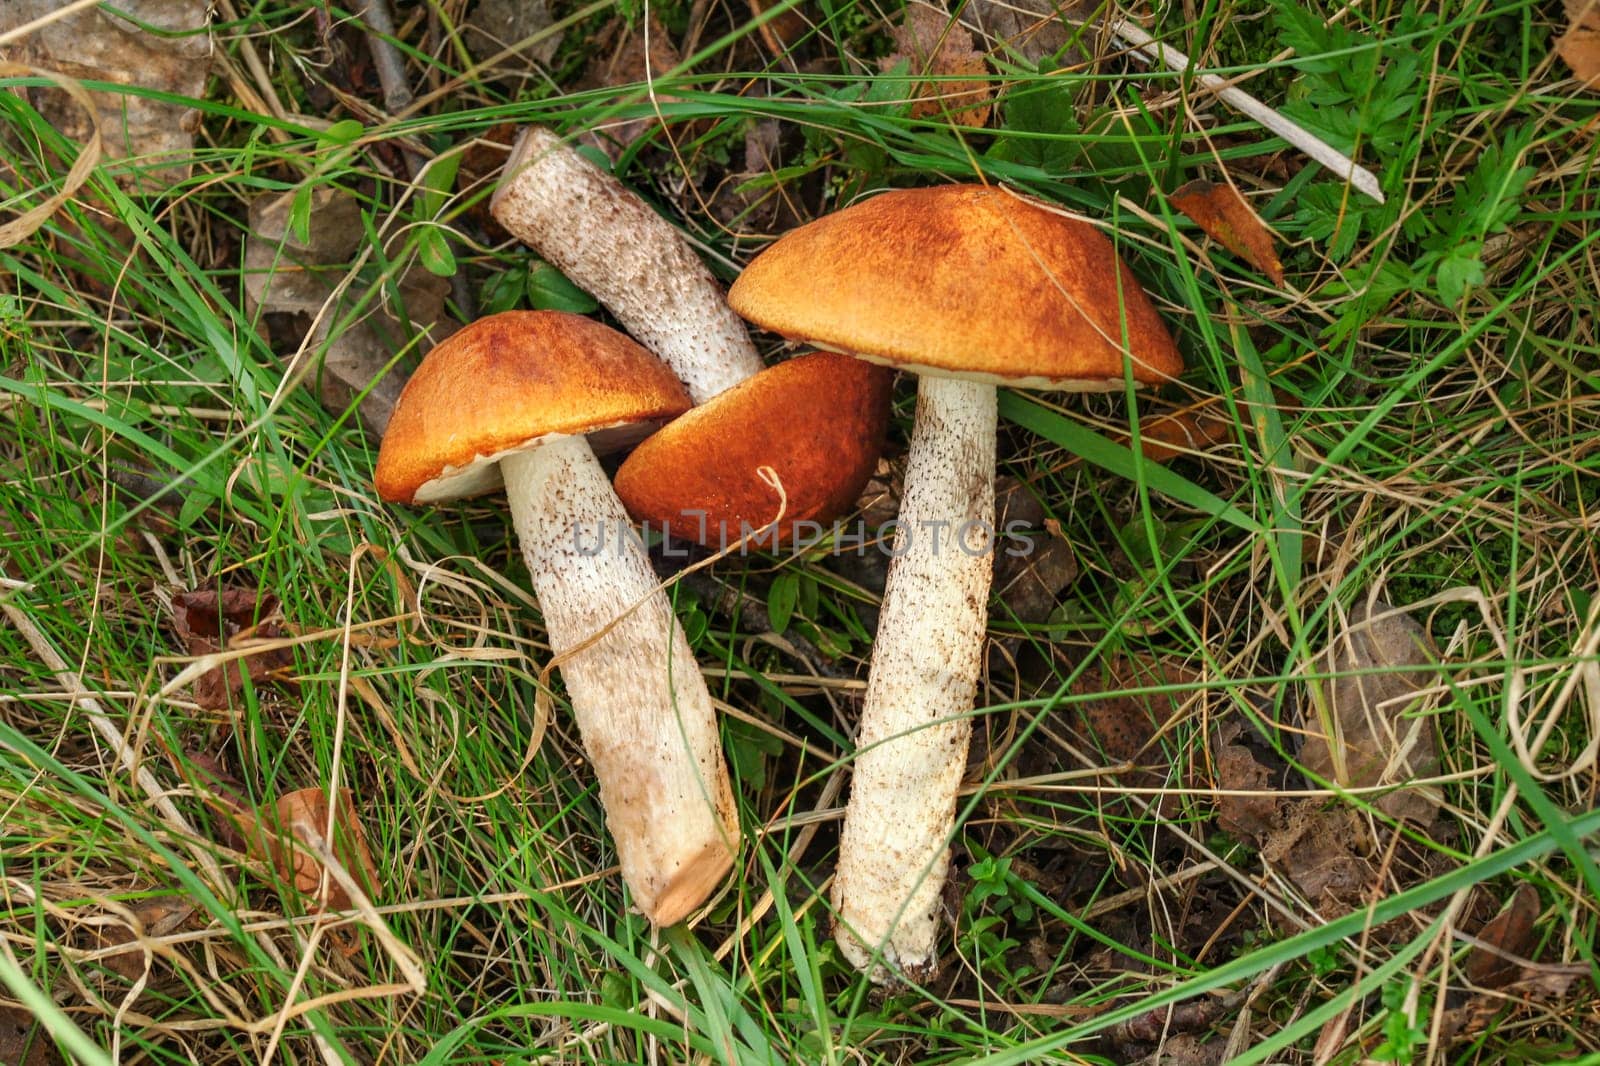 Top down view, red-capped scaber stalk mushrooms ( Leccinum aurantiacum ) freshly picked, laying in the grass.